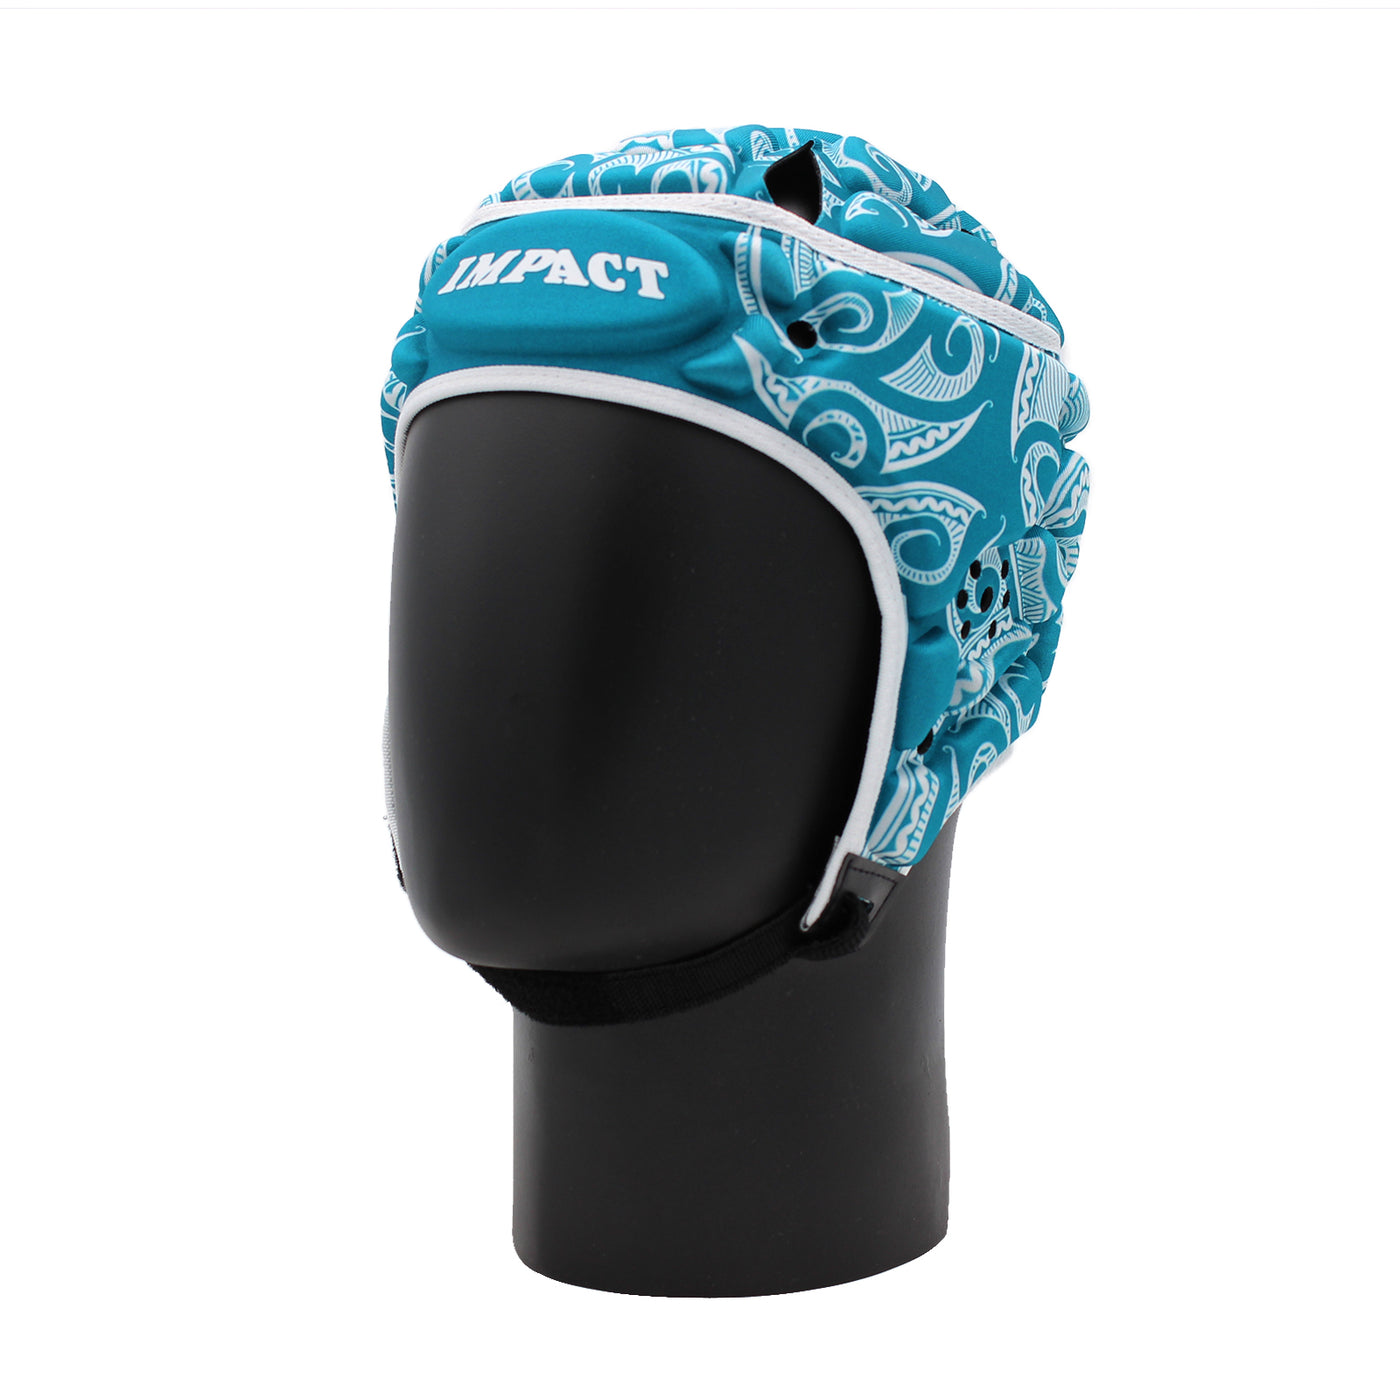 Impact Rugby Turquoise Scrumcap